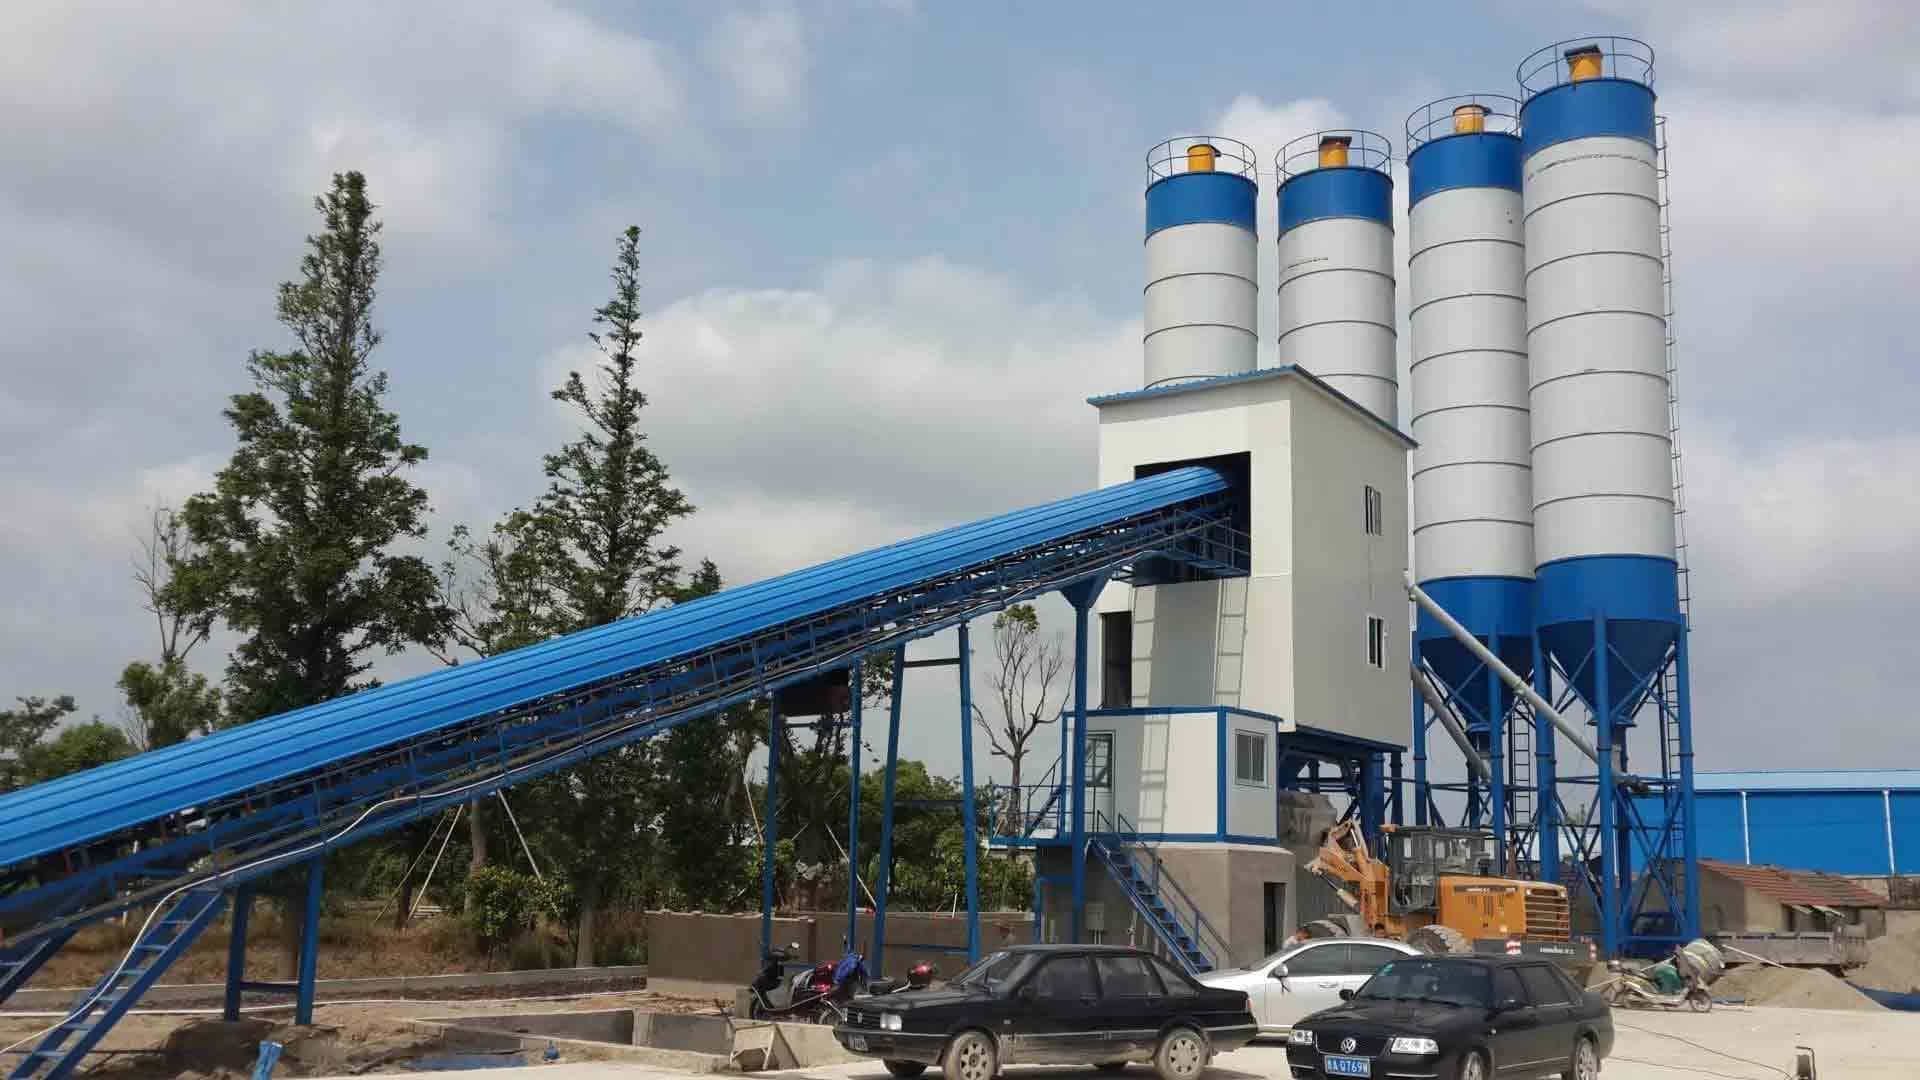 Stationary mixing plant